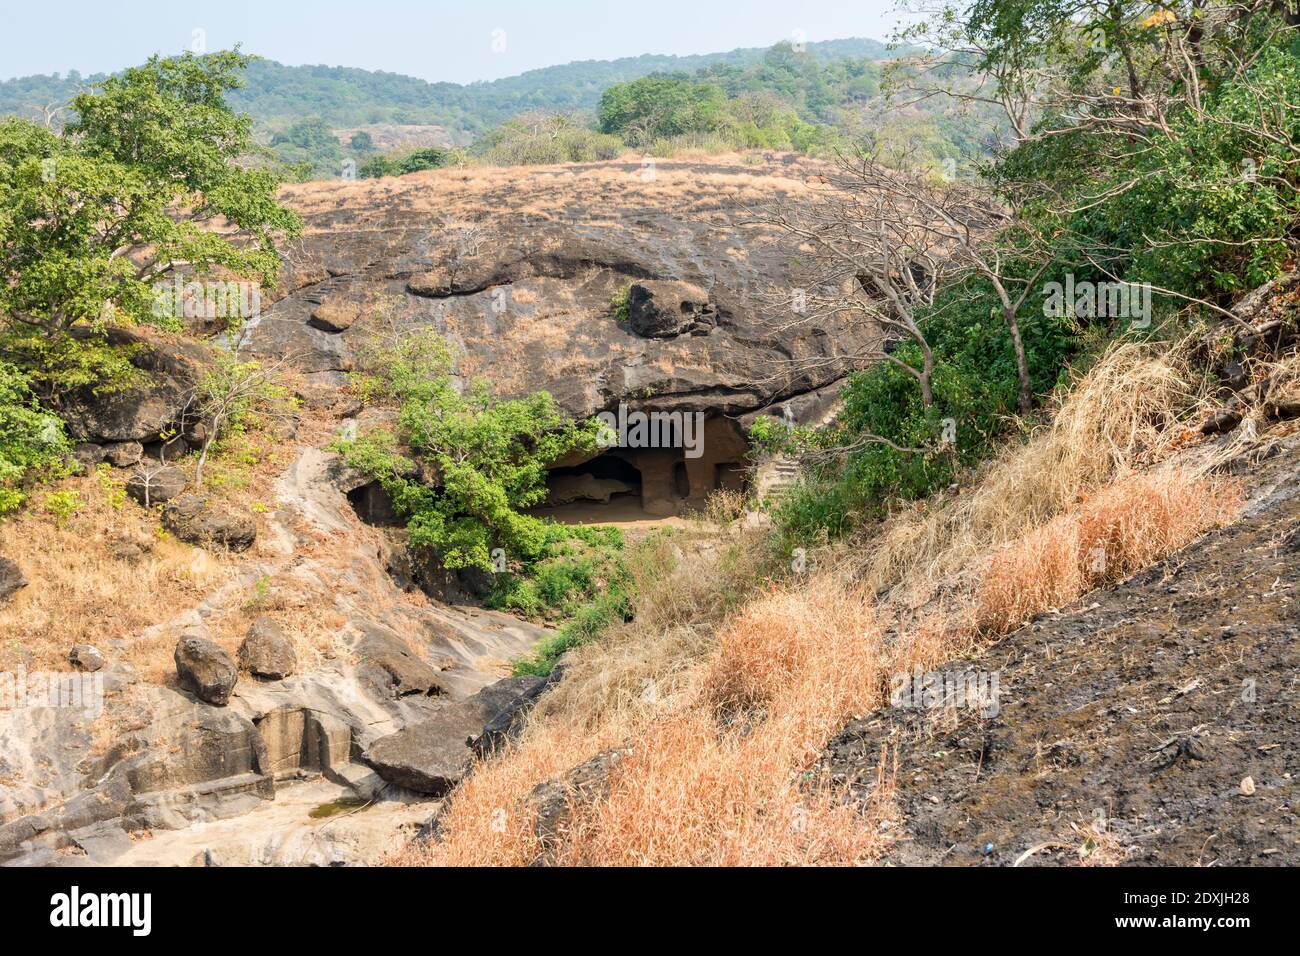 Kanheri cave complex, which is situated inside the Sanjay Gandhi National Park in the Borivali region of Mumbai, Indian Stock Photo